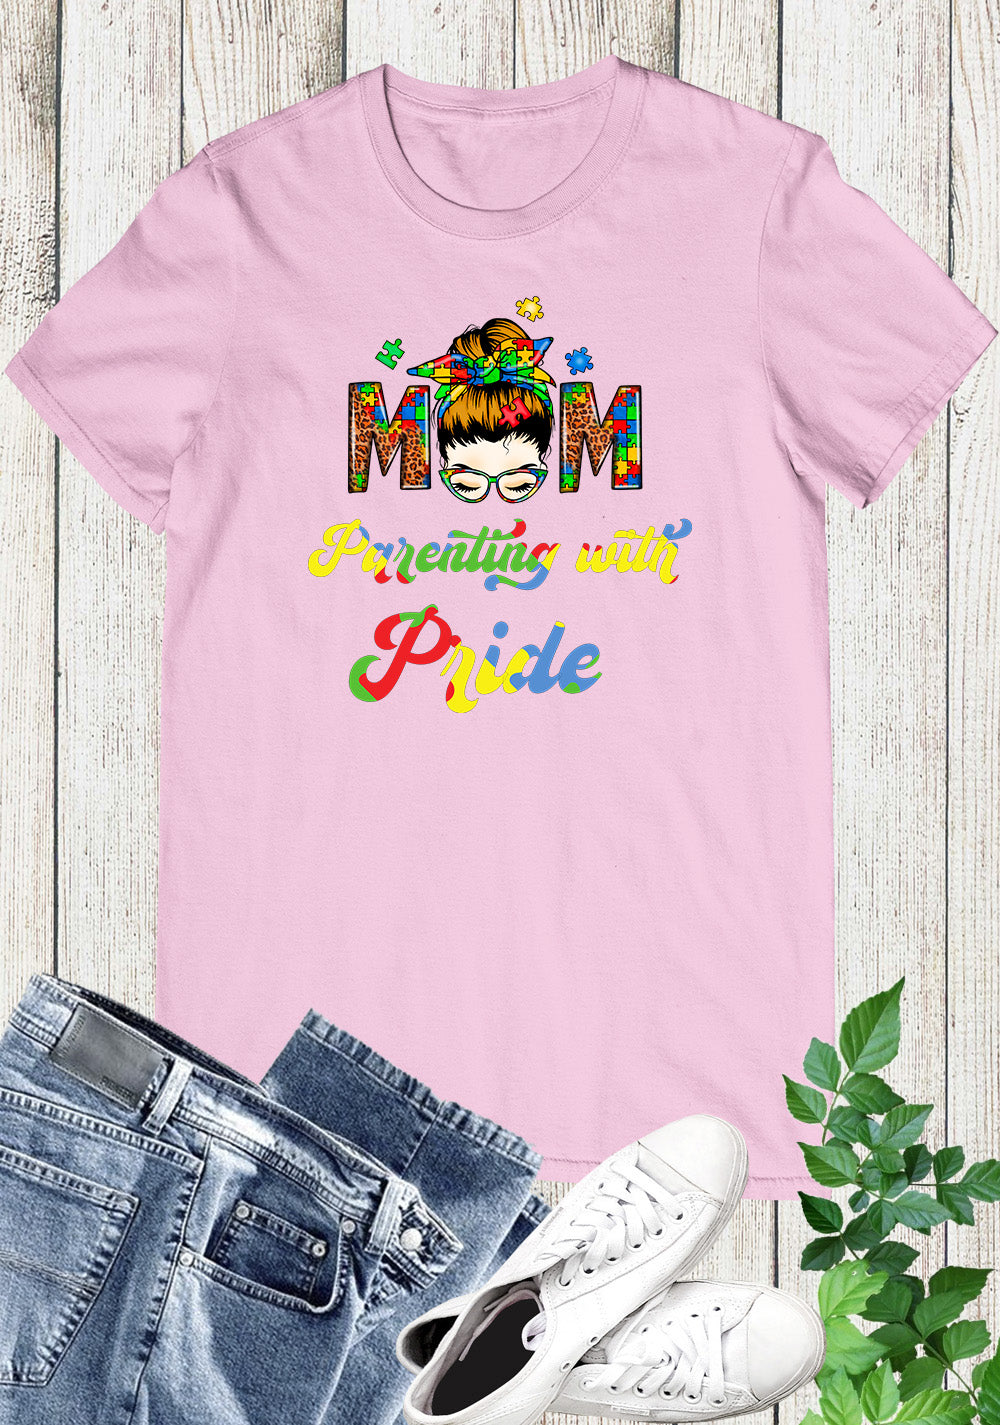 Mom Parenting with Pride Autism T Shirt